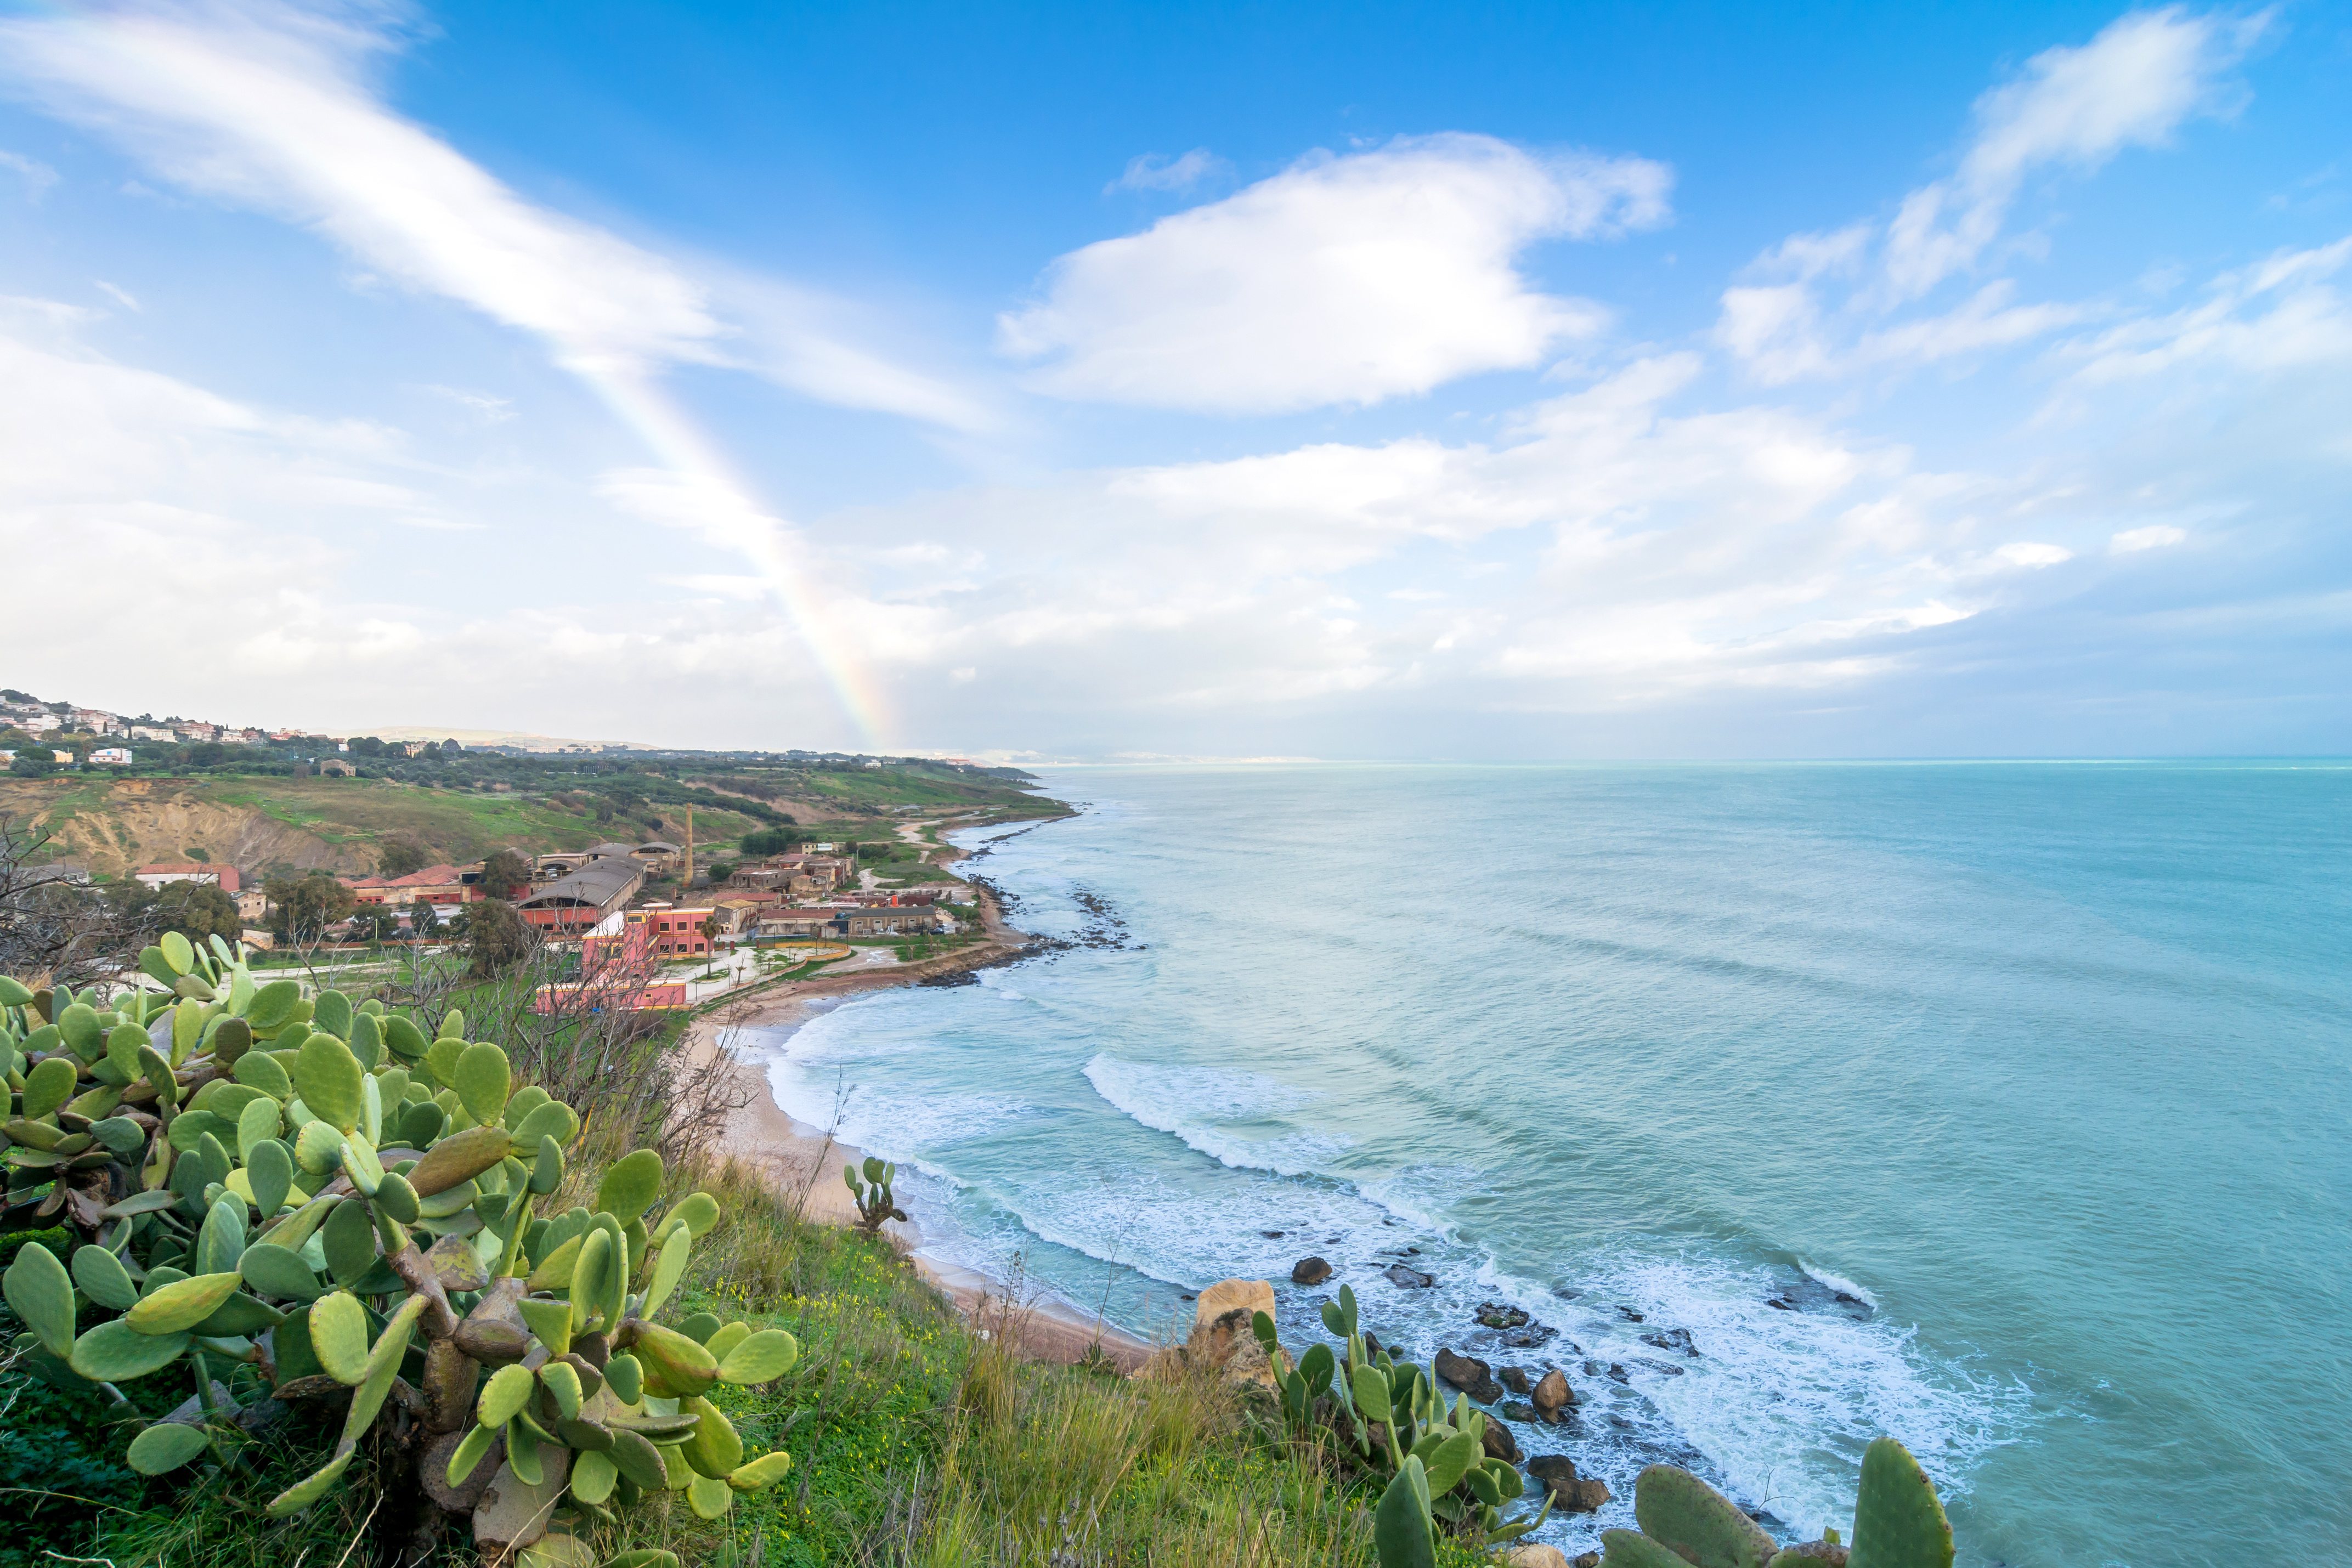 SCIACCA, ITALY - FEBRUARY 22, 2014: panoramic view of coastline with dramatic sky in Sciacca, Italy. Sciacca is known as the city of thermal baths since Greek domination in the 3rd and 4th centuries BC (licensed stock photo from Adobe Stock)